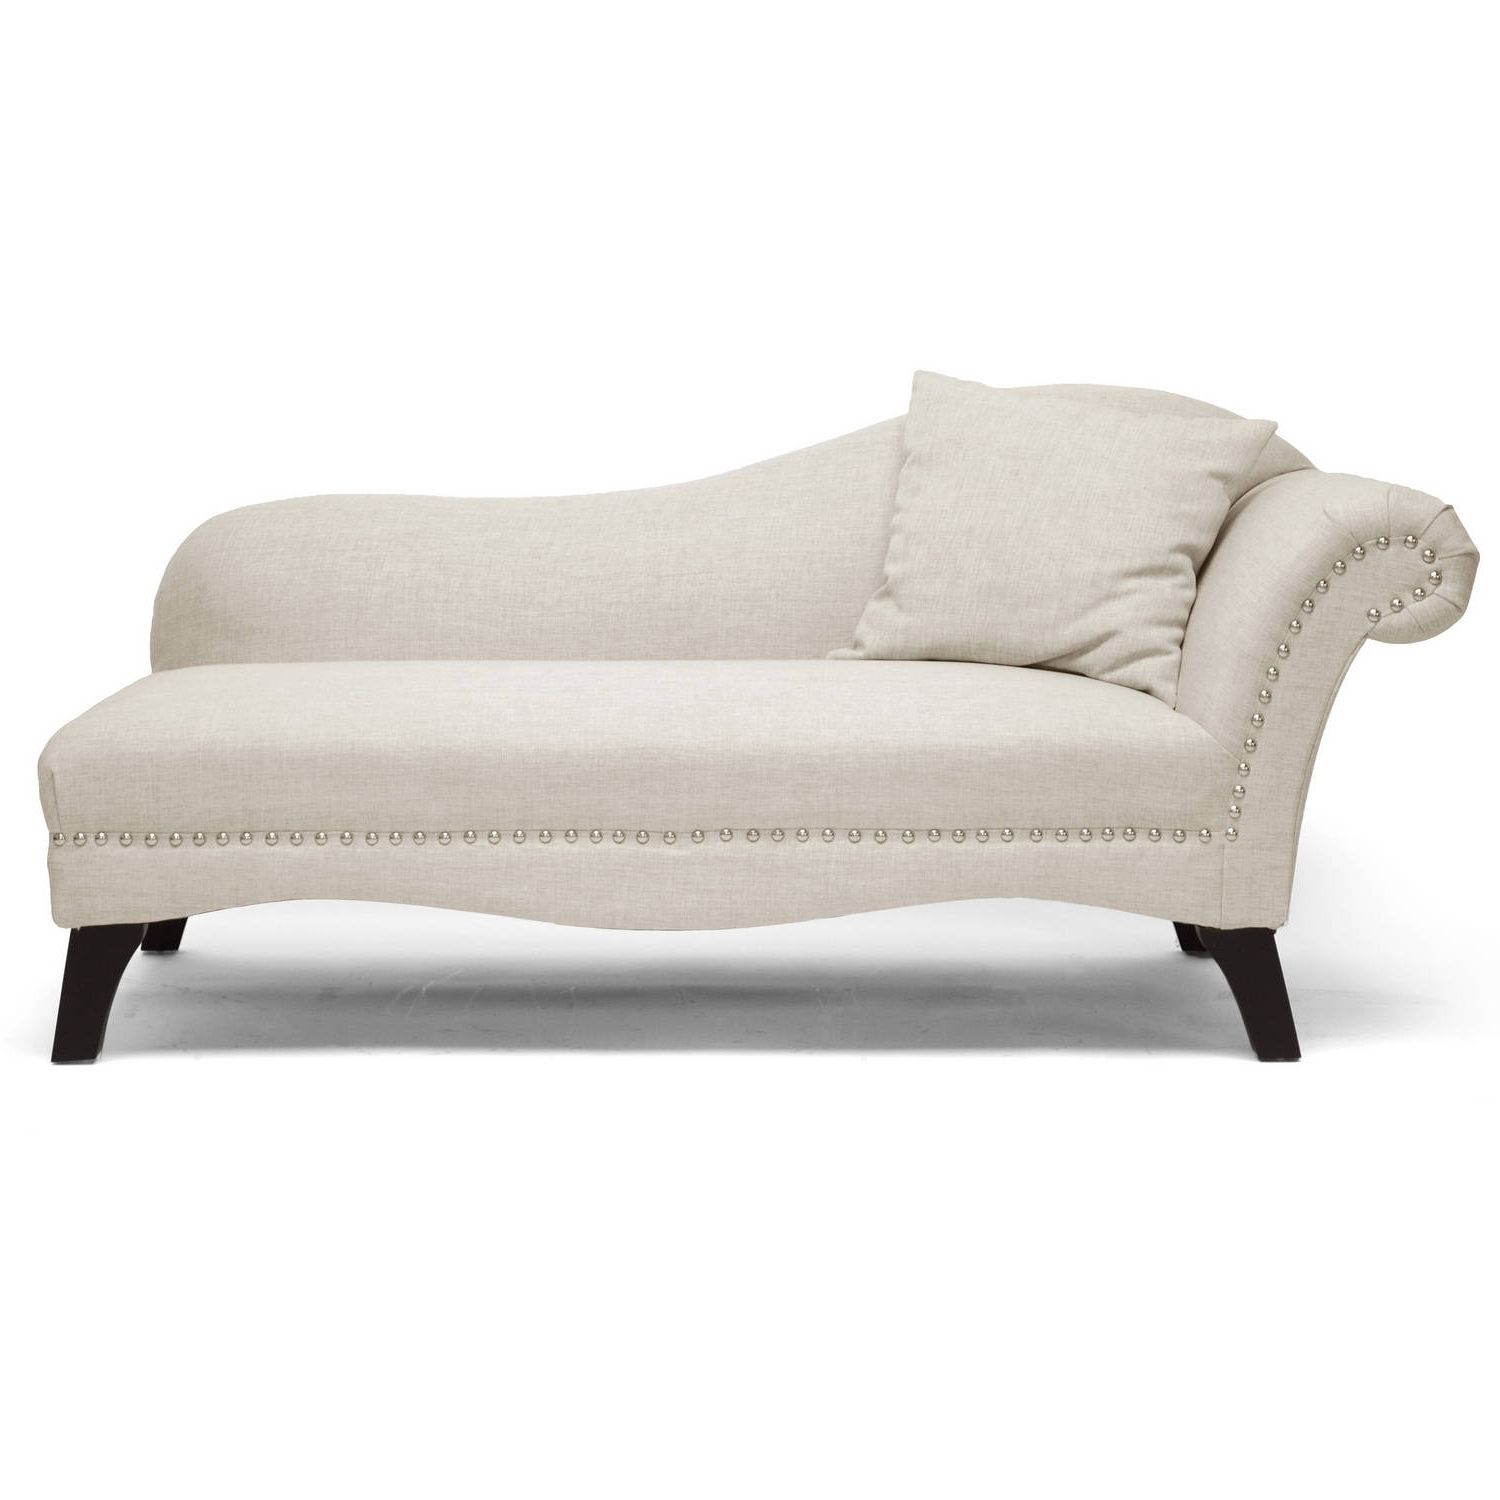 Cheap Chaise Lounges Regarding Famous Chaise Lounges – Walmart (View 1 of 15)